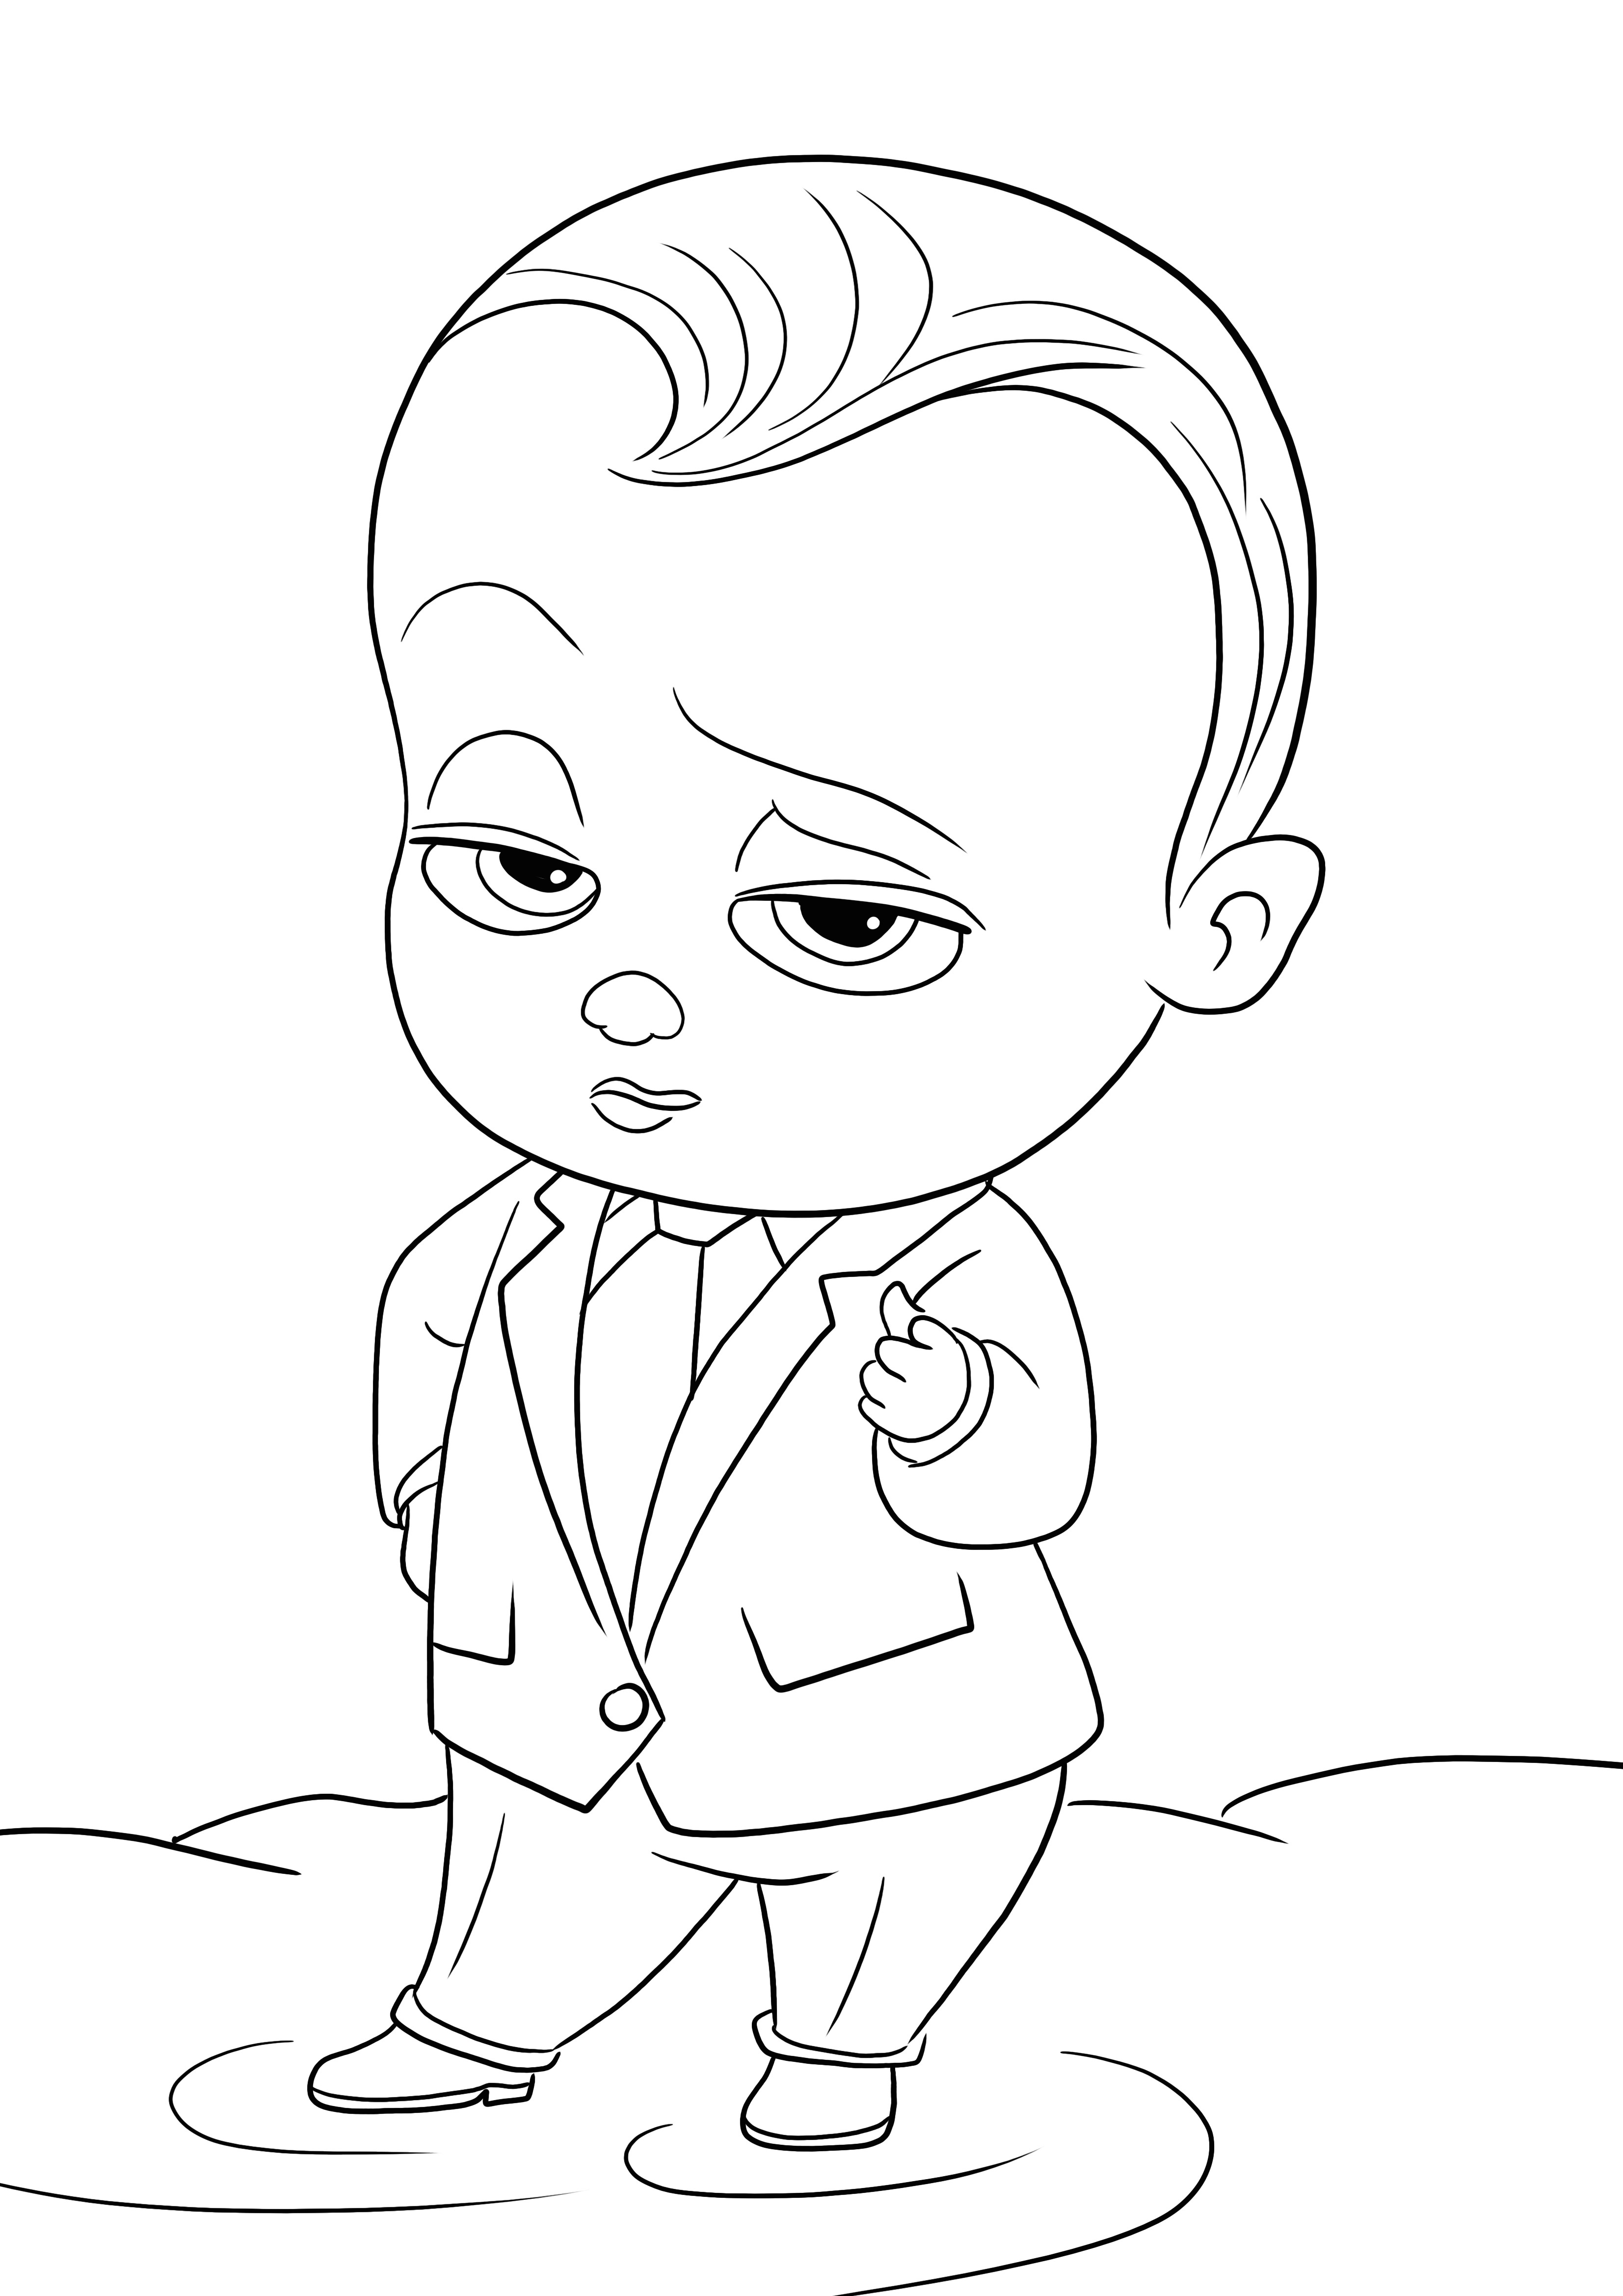 Free coloring of funny Baby Boss to print and download for kids